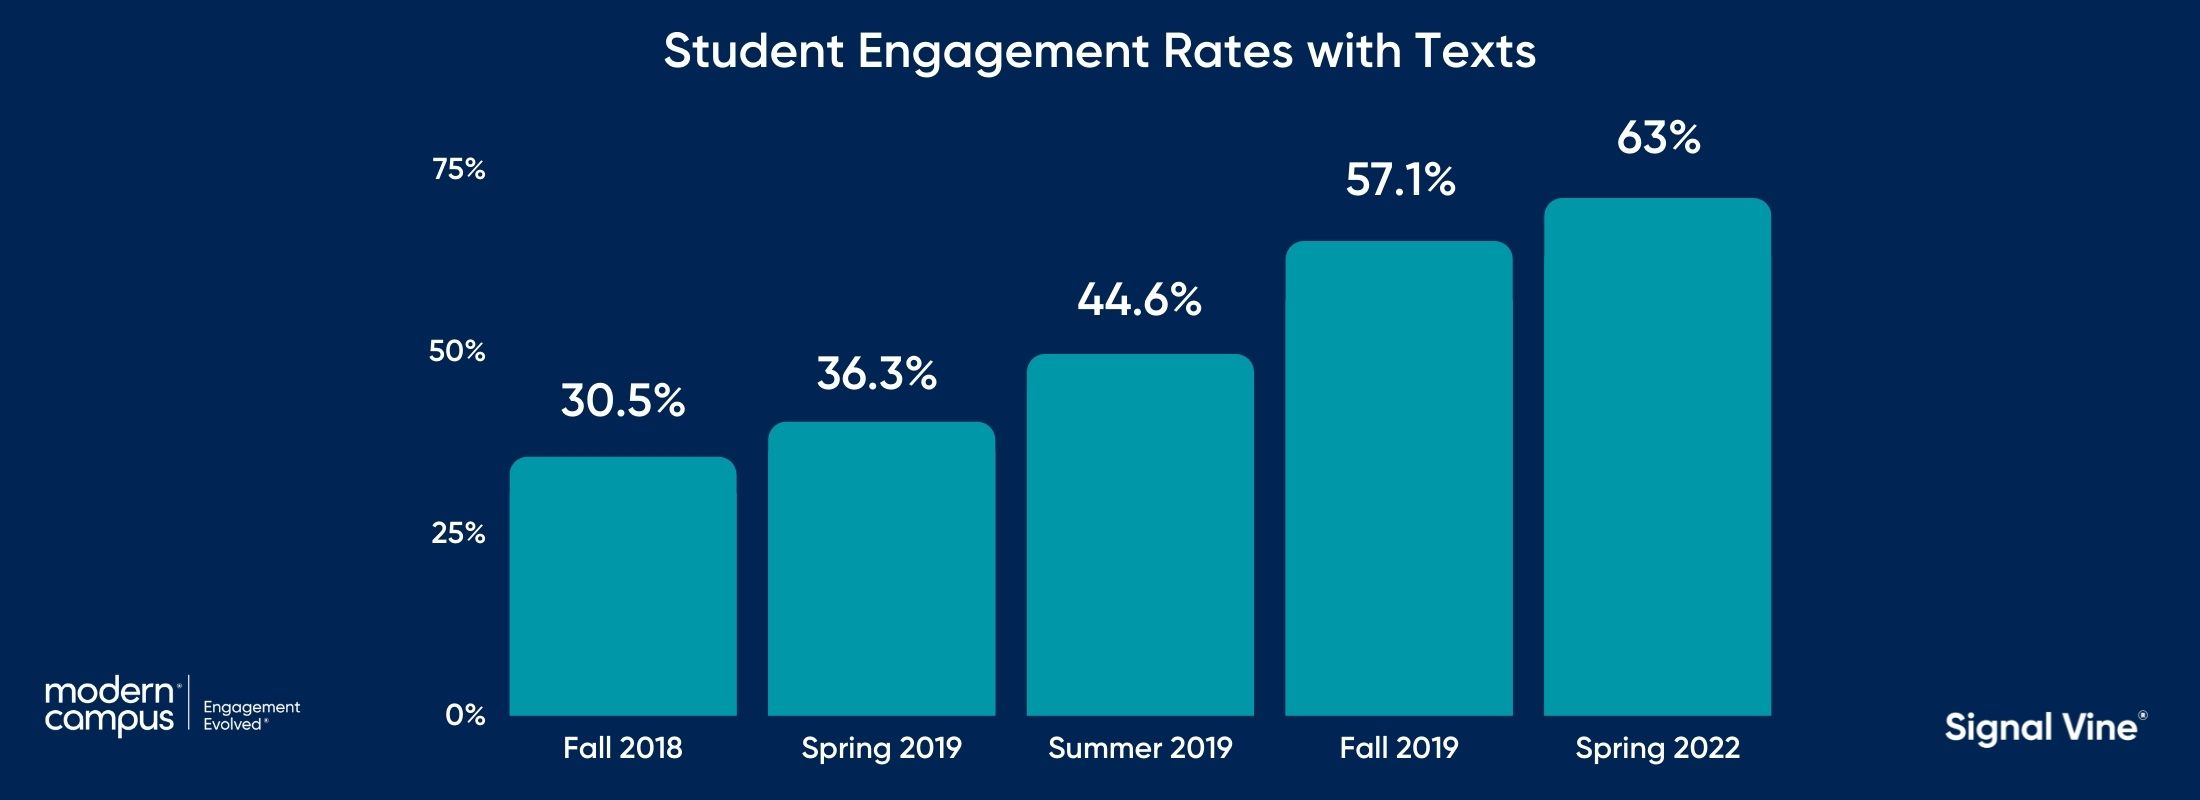 bar graph showing the steady increase in student engagement with texts, from 30.5% in Fall 2018 to 63% in Spring 2020